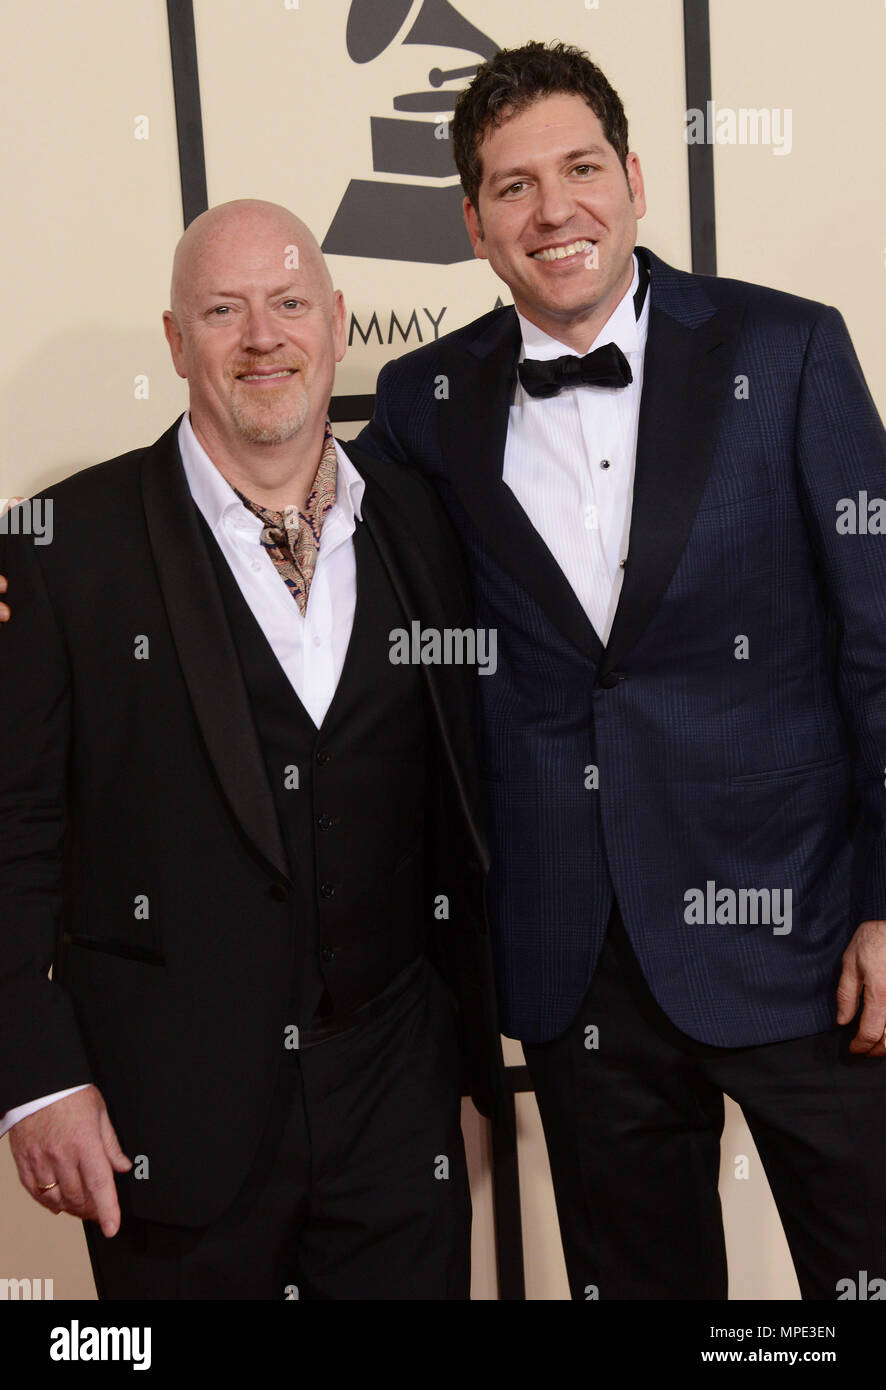 Billy Jay Srein, Steve Sidwell at the 57th Annual GRAMMY Awards at the  Staples Center in Los Angeles. February 8, 2015.Billy Jay Srein, Steve  Sidwell Event in Hollywood Life - California, Red